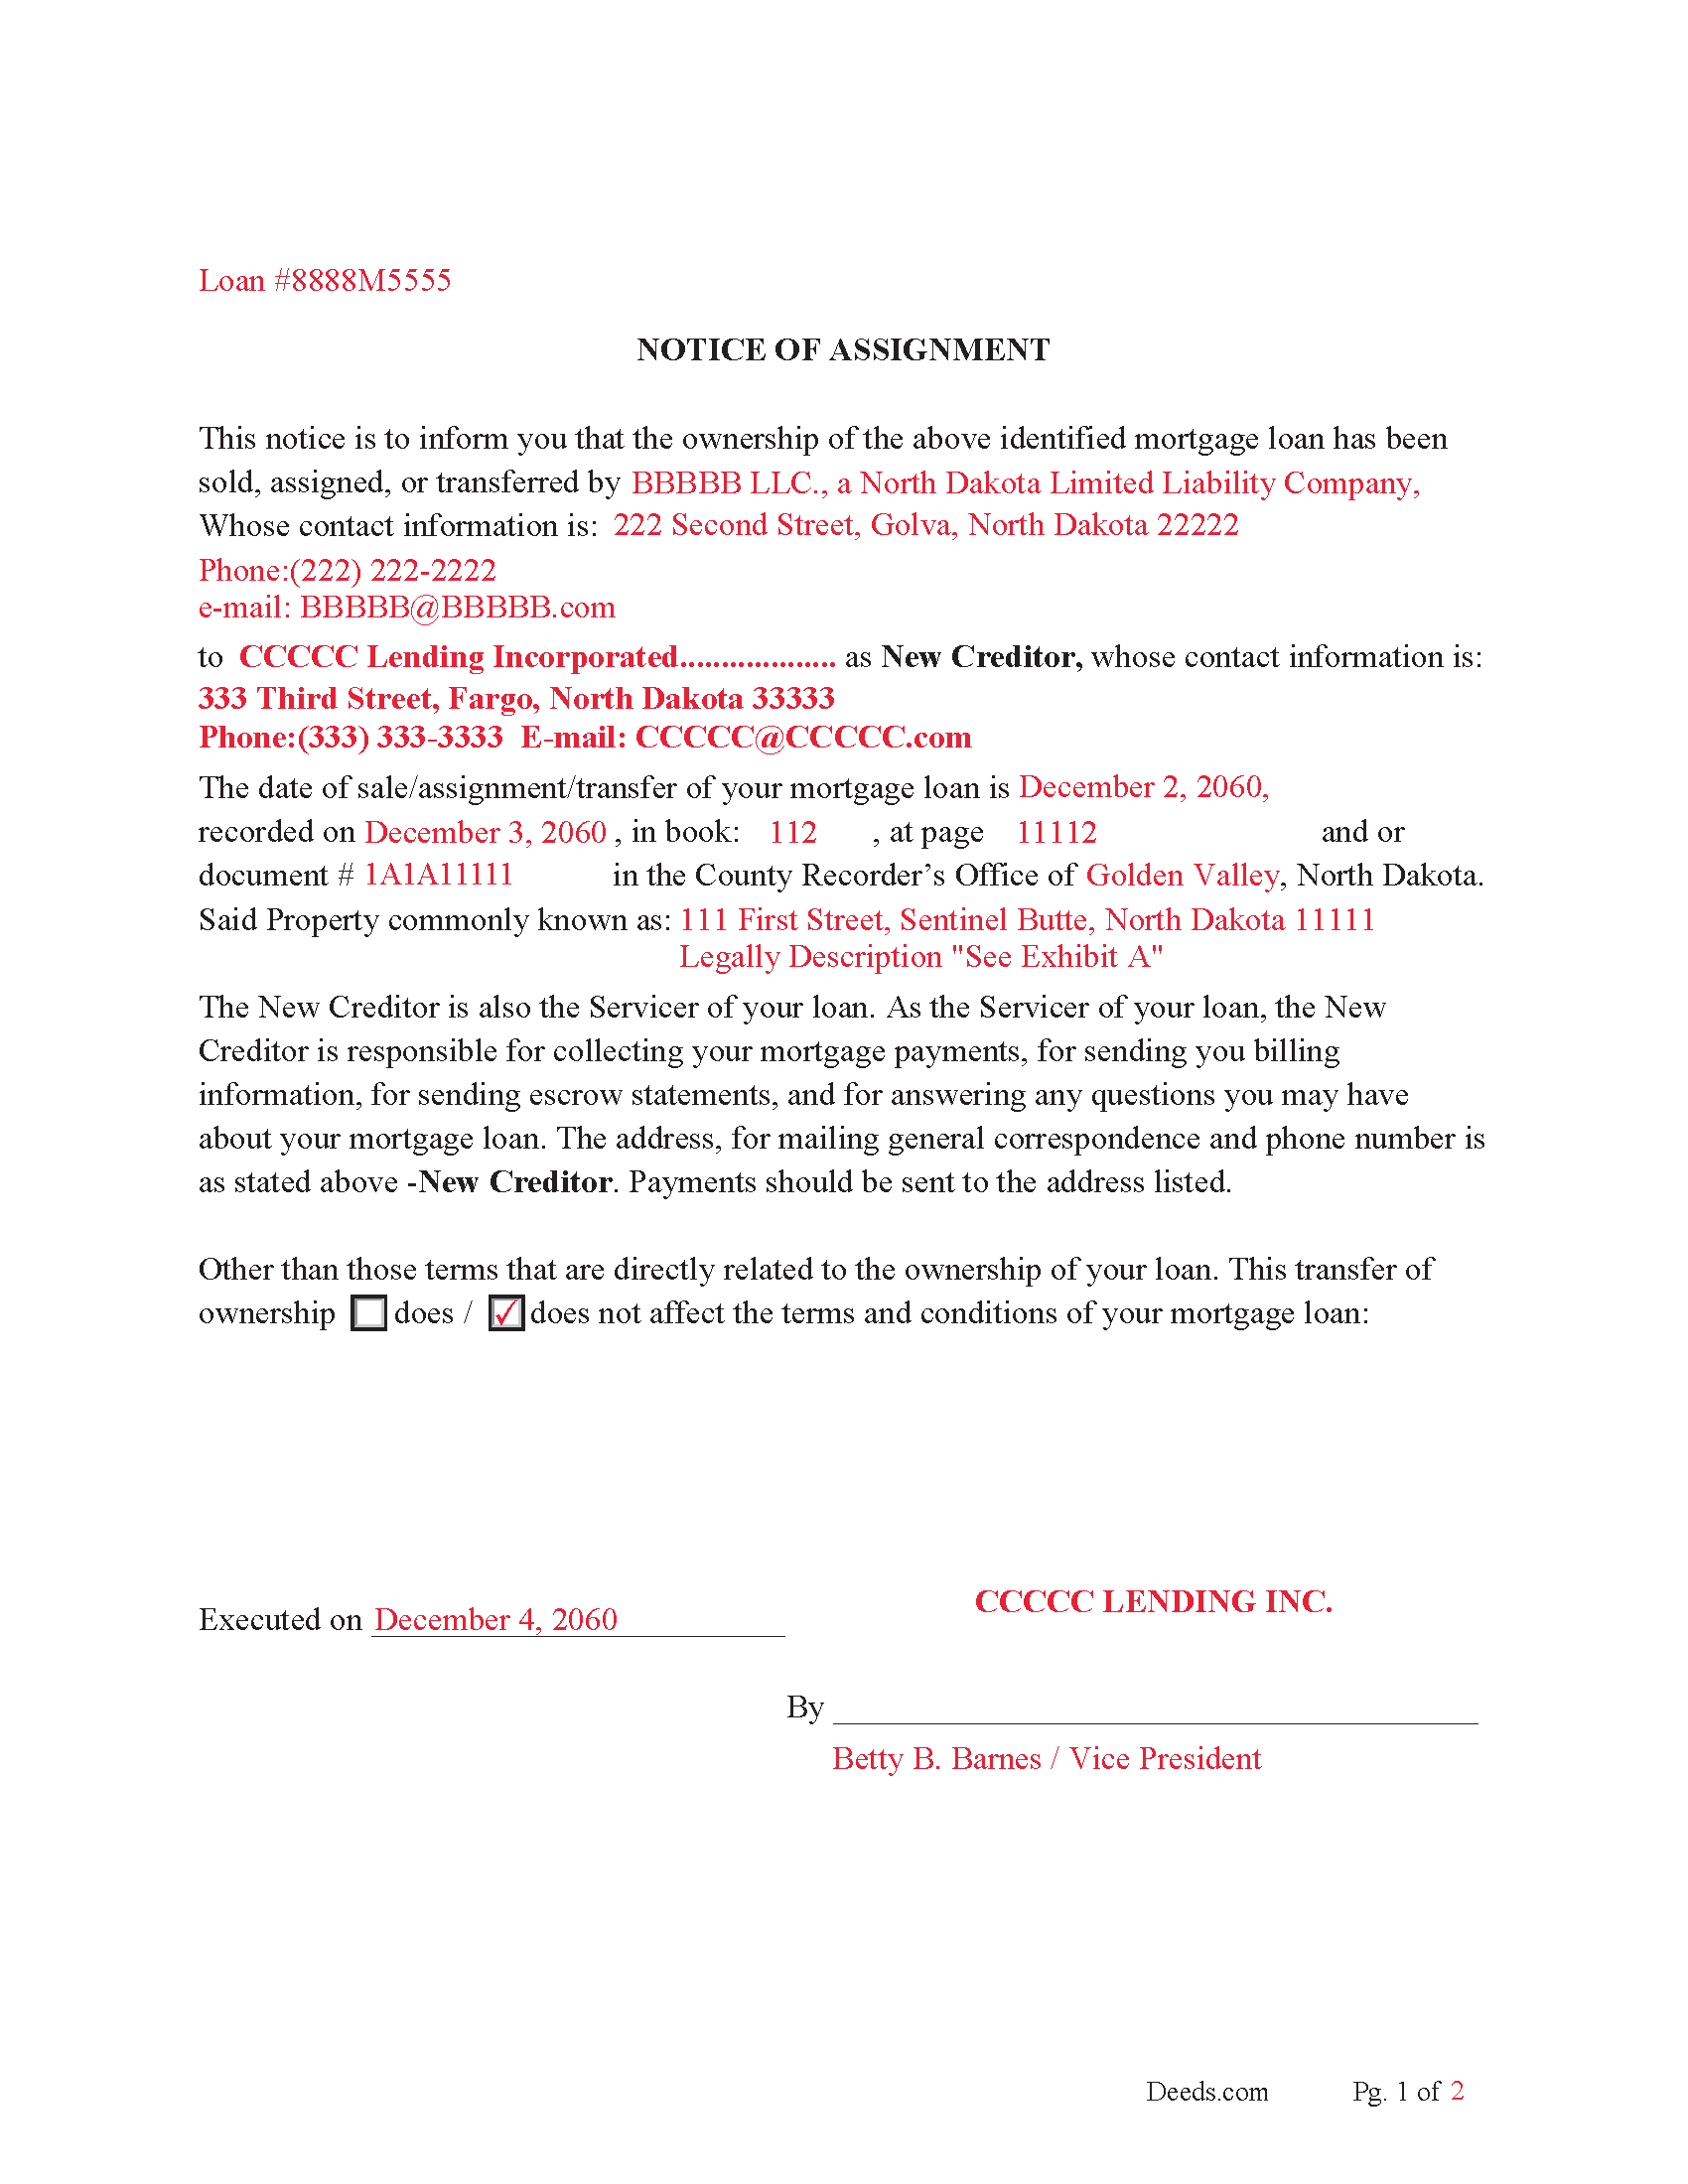 Completed Example of as Assignment of Mortgage Document